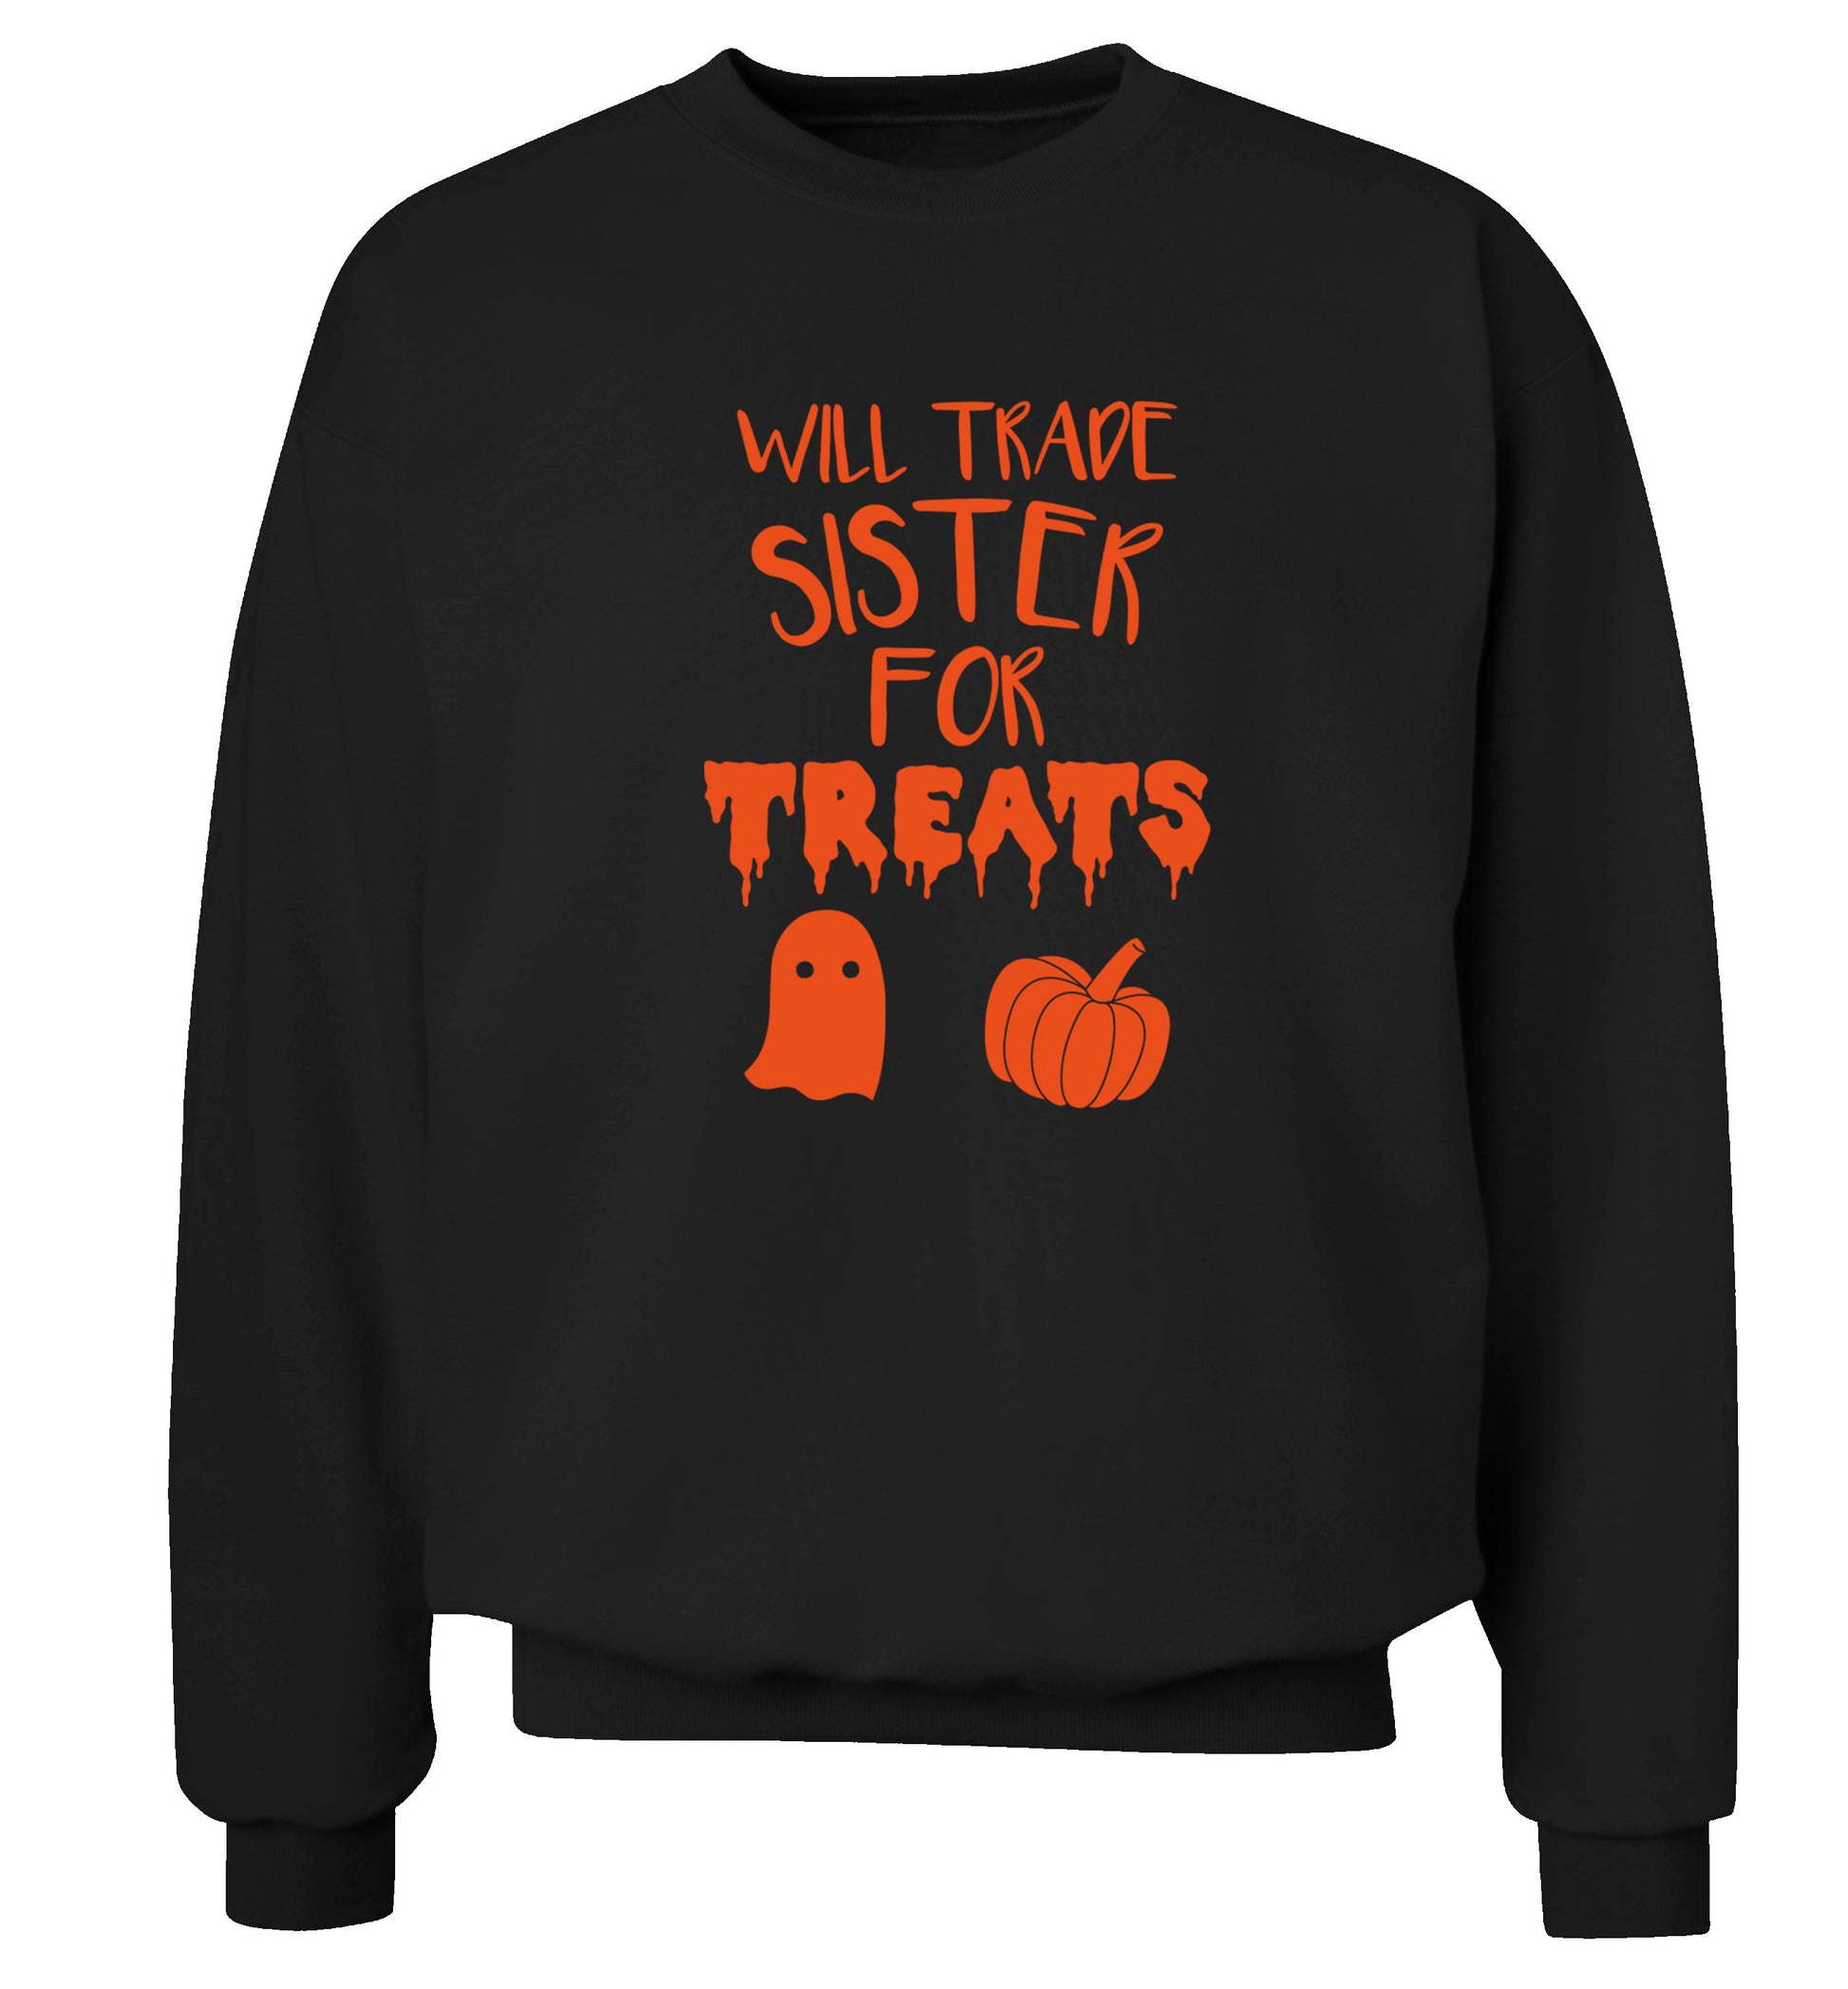 Will trade sister for treats Adult's unisex black Sweater 2XL